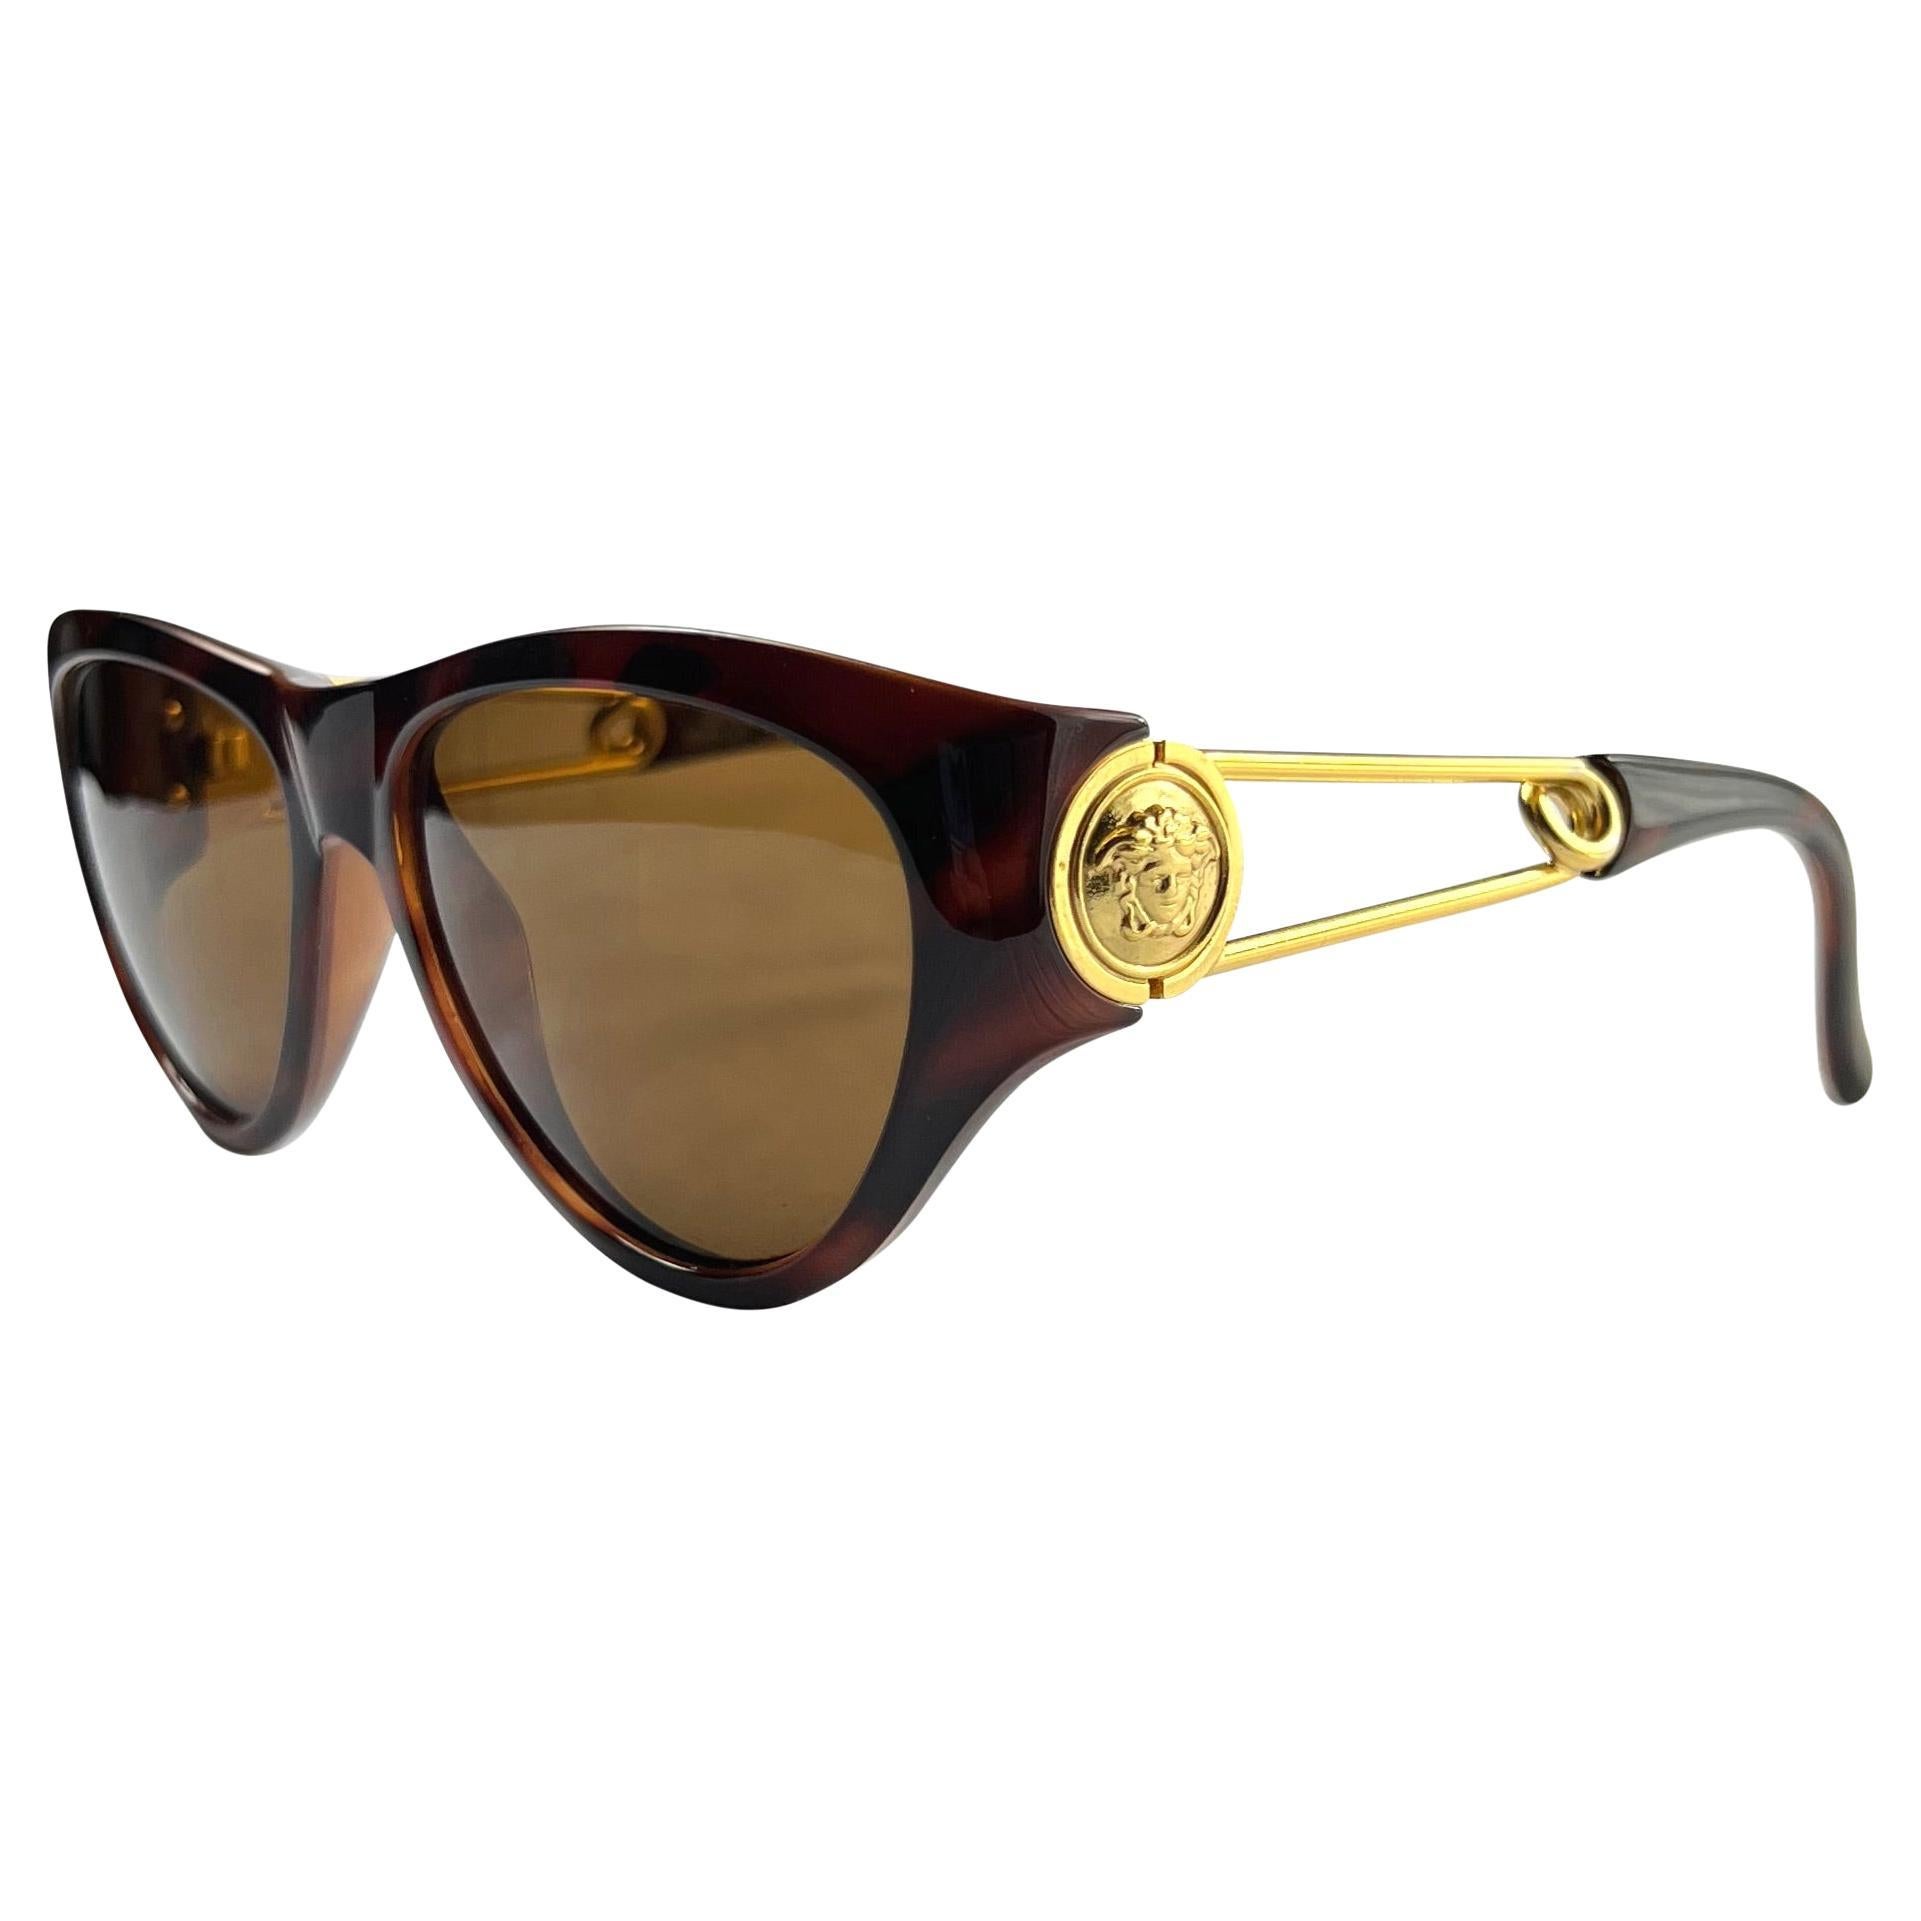 S/S 1994 Gianni Versace Safety Pin Medusa Gold Brown Acetate Sunglasses For Sale